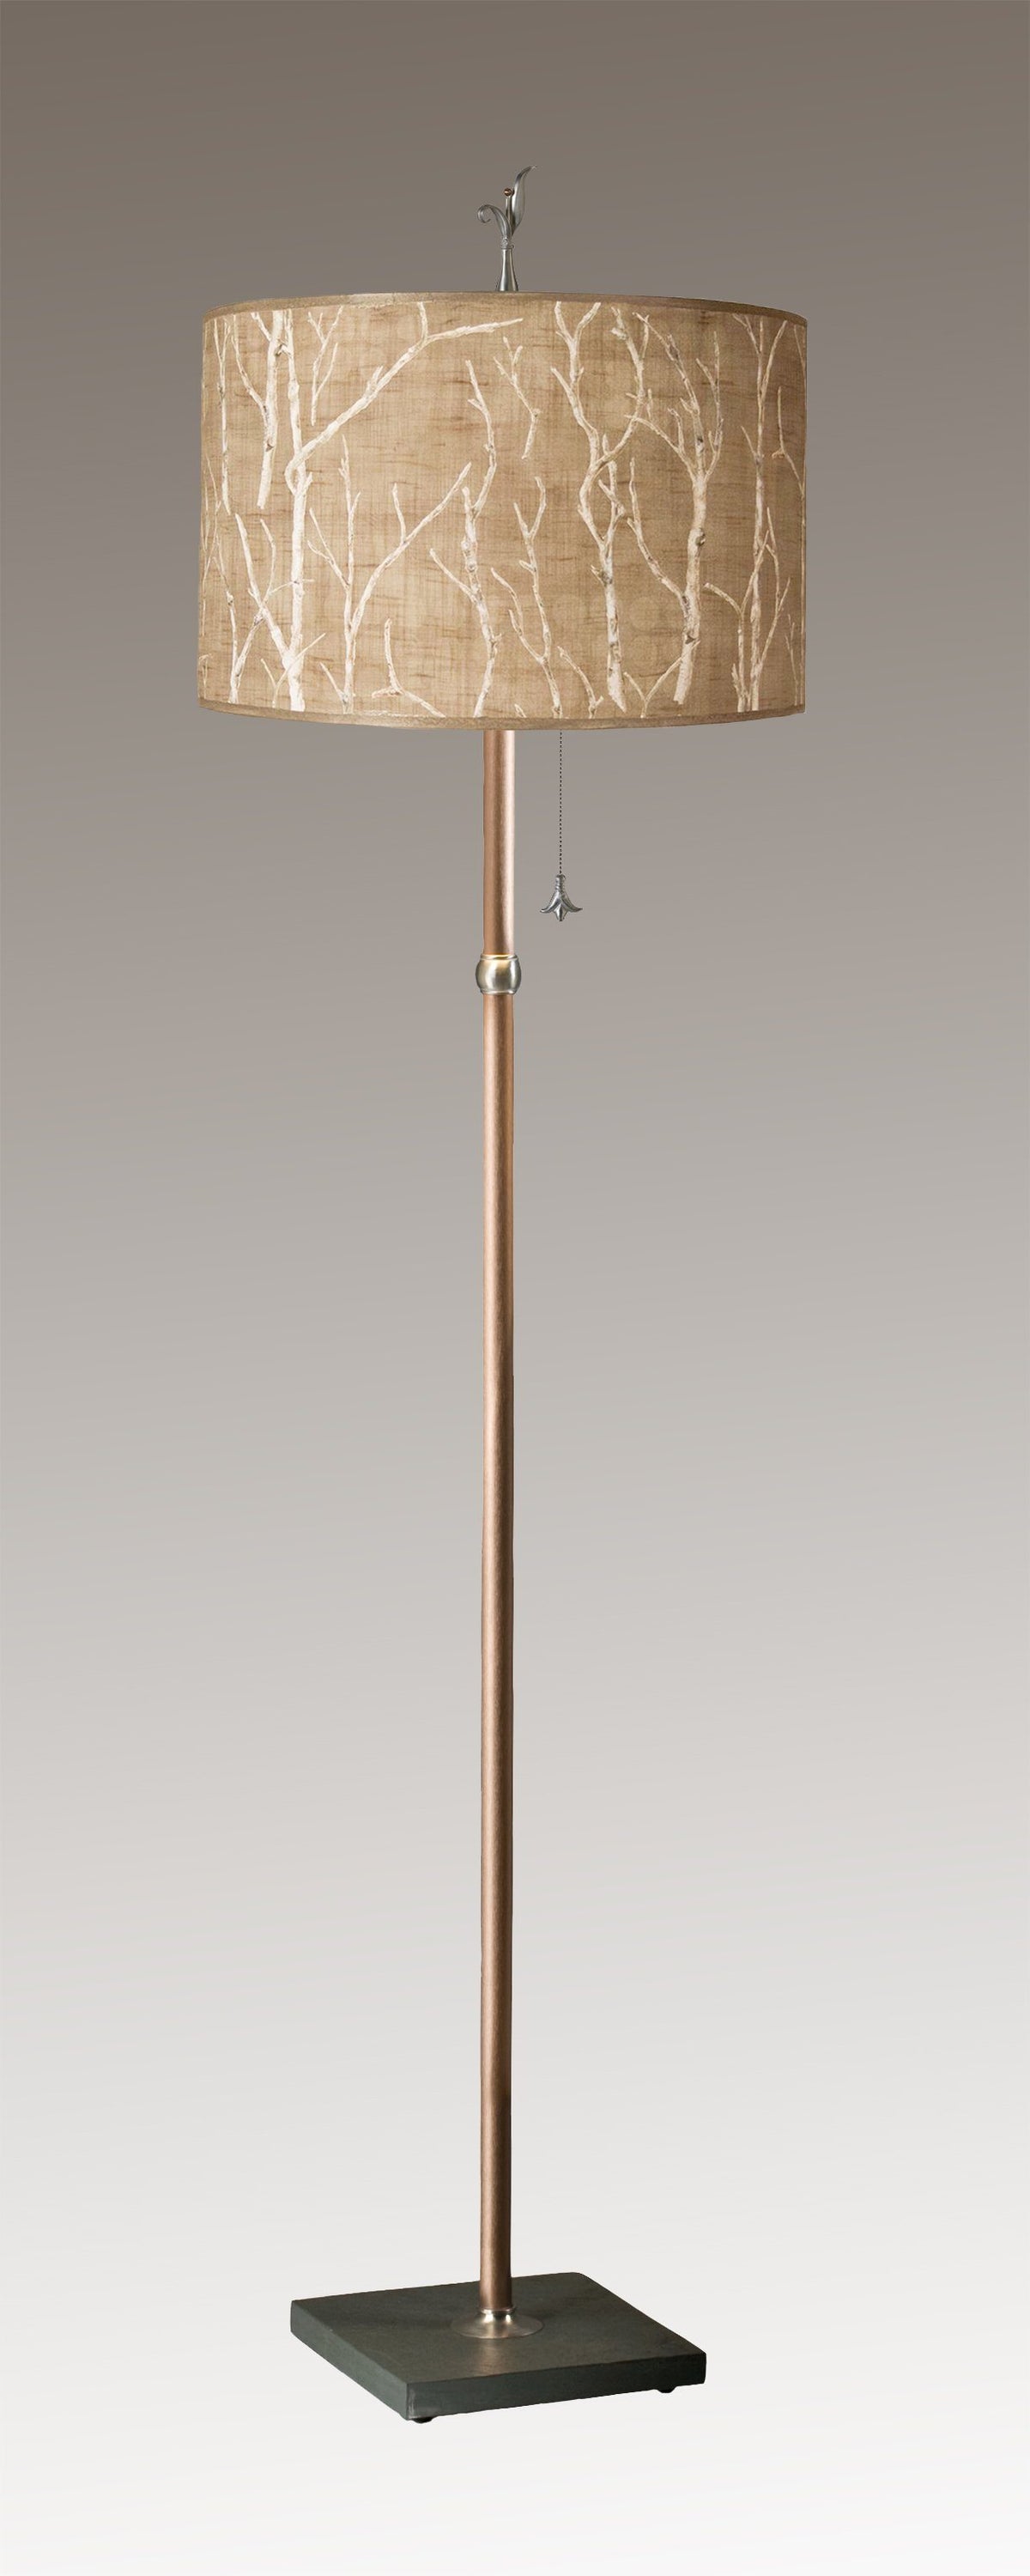 Janna Ugone &amp; Co Floor Lamps Copper Floor Lamp with Large Drum Shade in Twigs